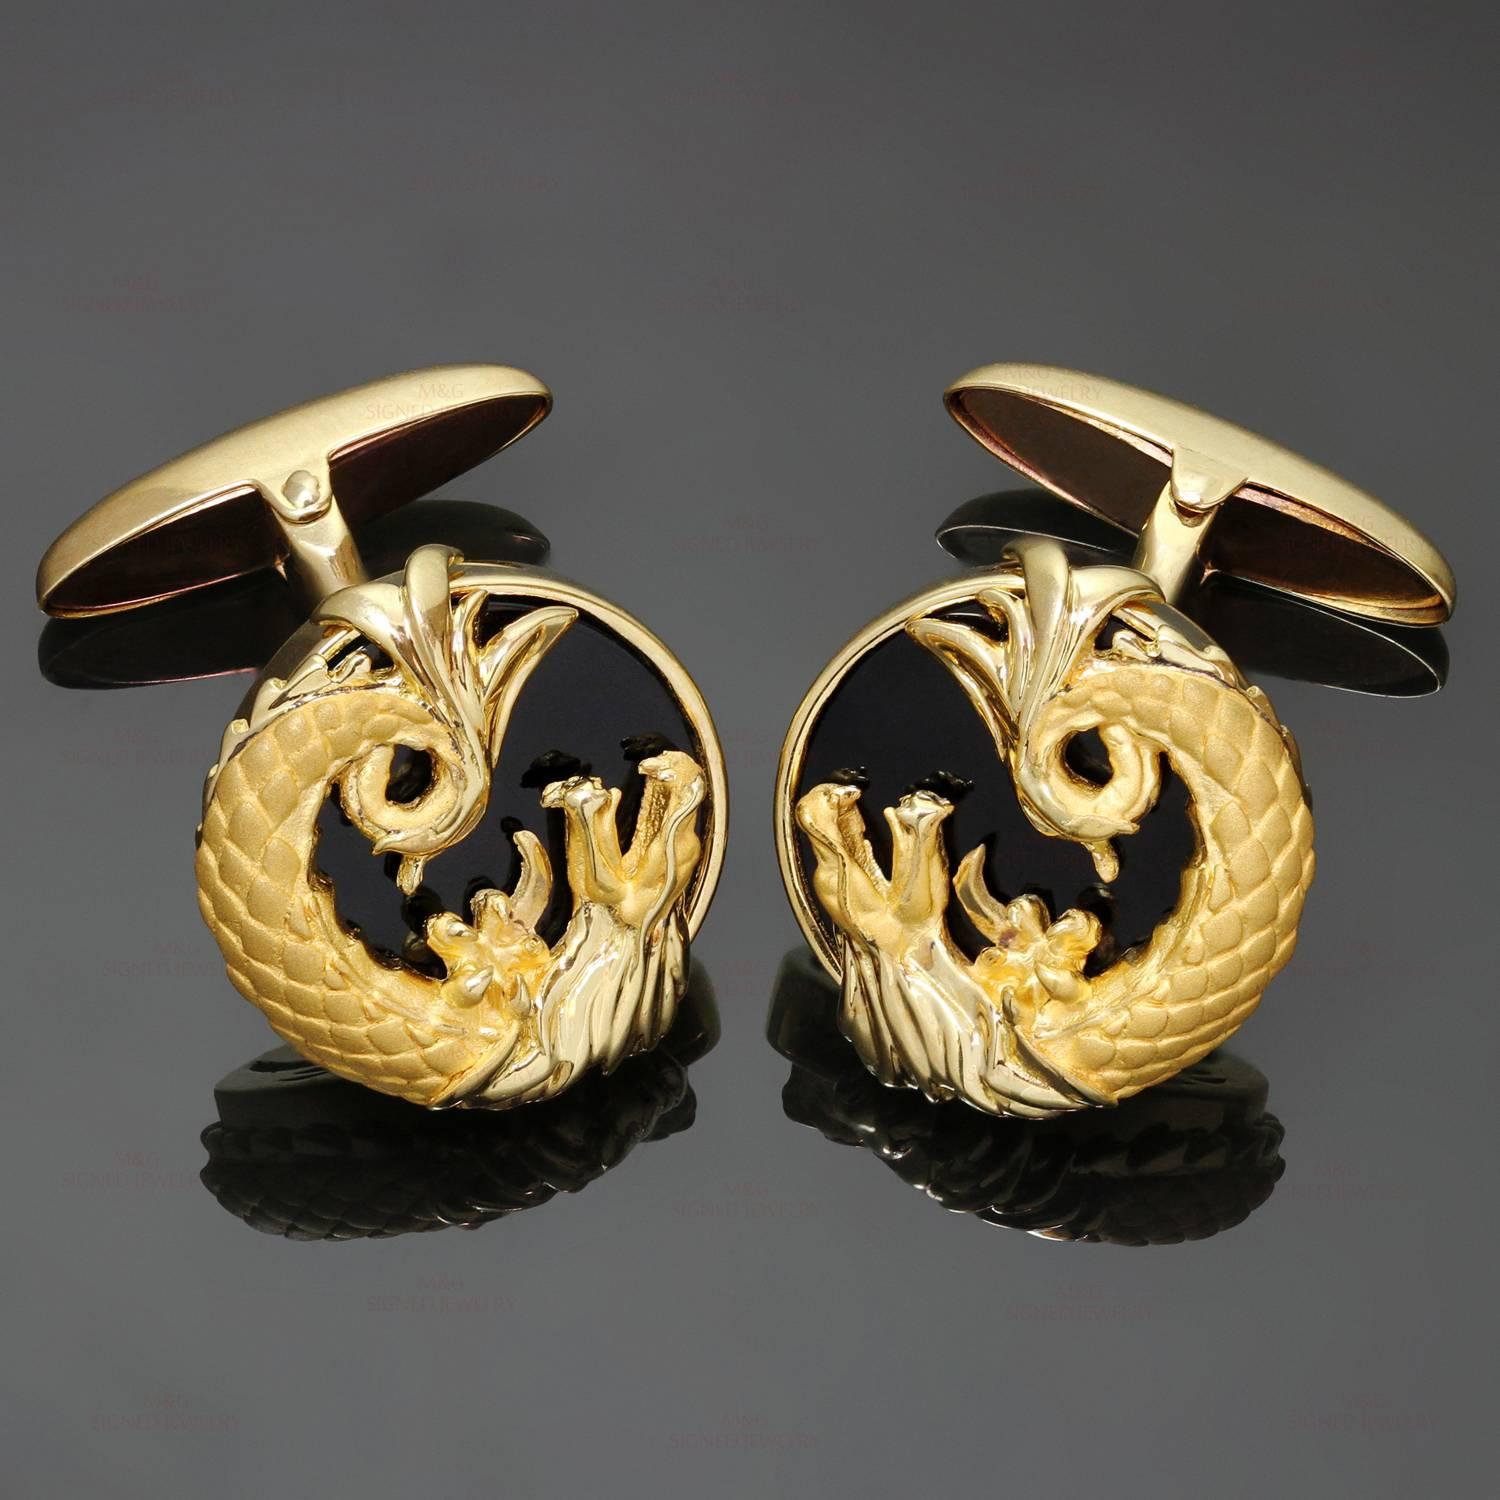 These stunning Carrera y Carrera cufflinks from the Circulos de Fuego collection feature an inctricate dragon design crafted in 18k yellow gold and accented with black onyx. Made in Spain circa 2000s. Measurements: 0.70" (18mm) width,